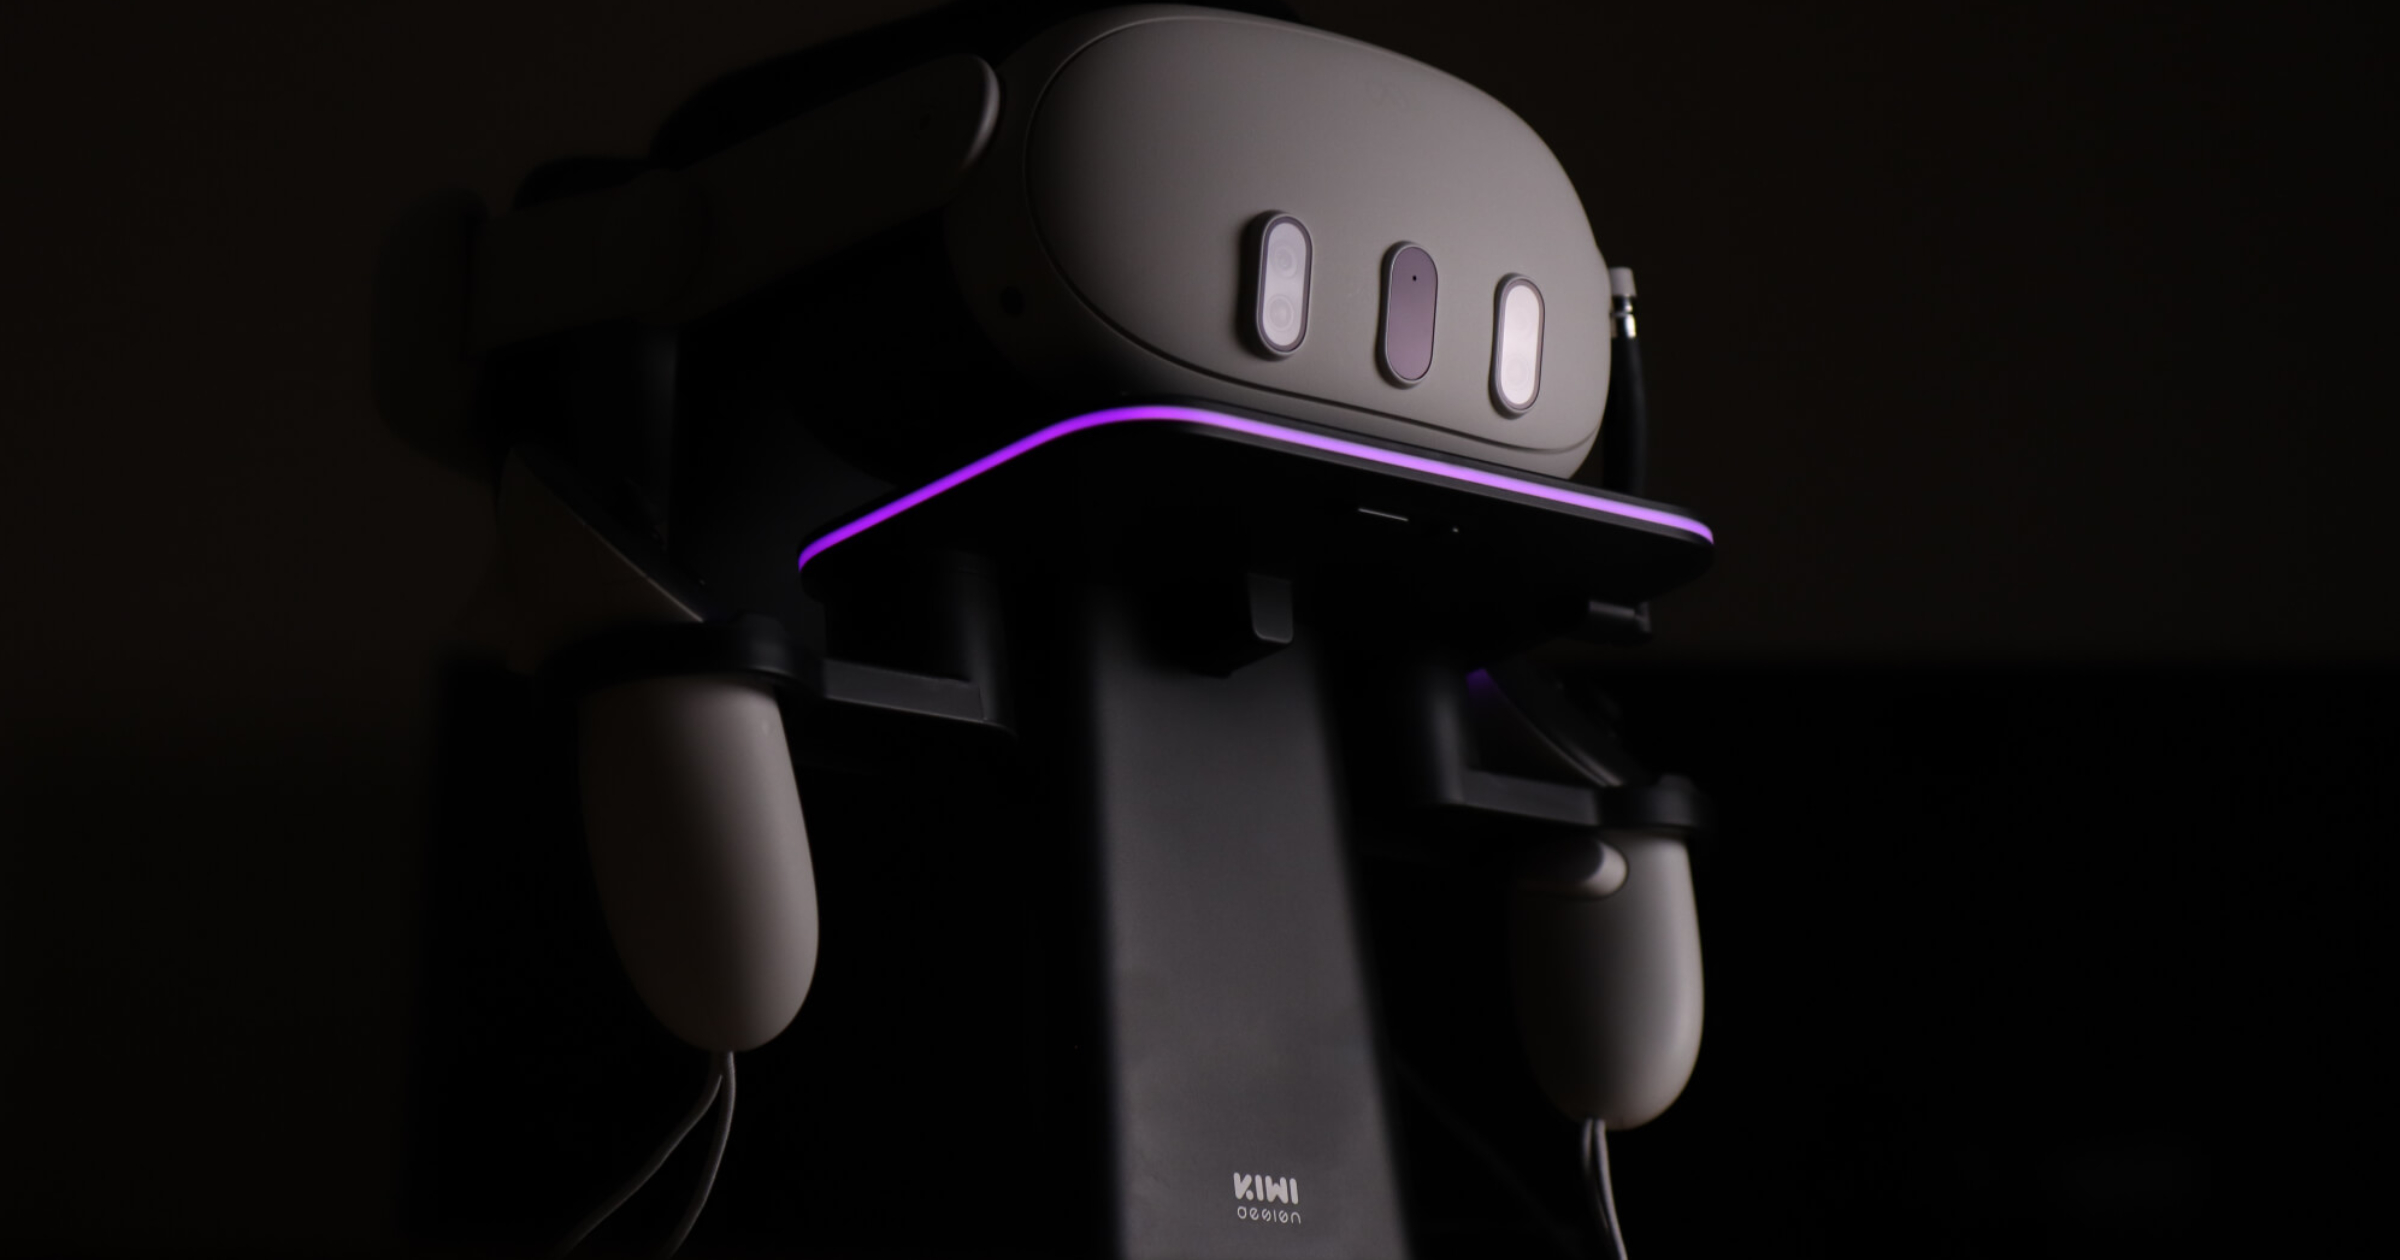 The 3 Kiwi Design Products You Need For Oculus Quest 2 - Review 